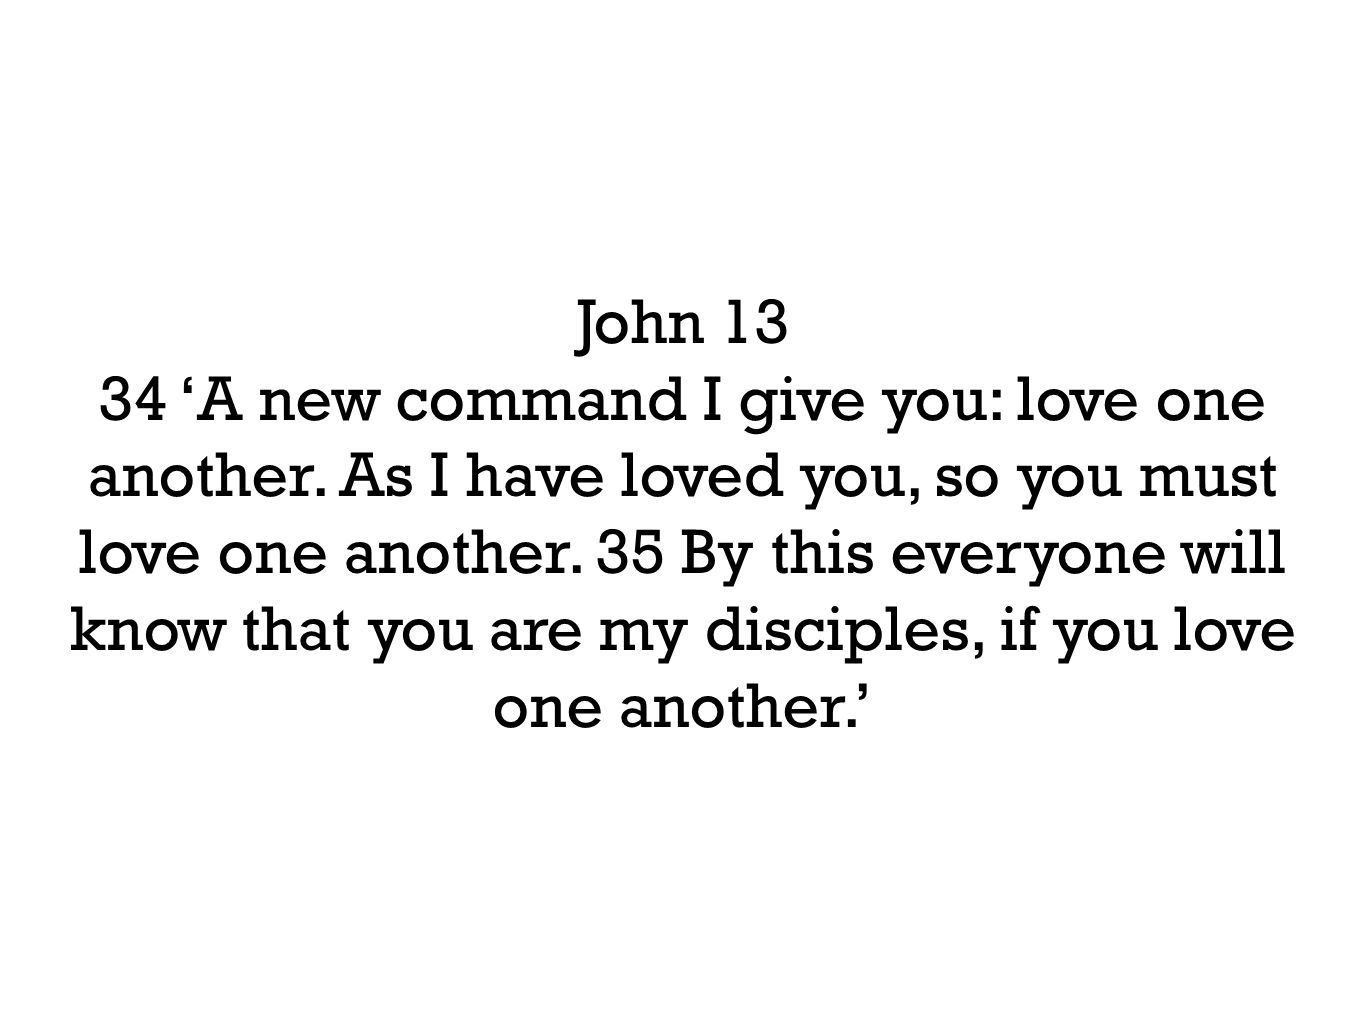 John ‘A new command I give you: love one another.